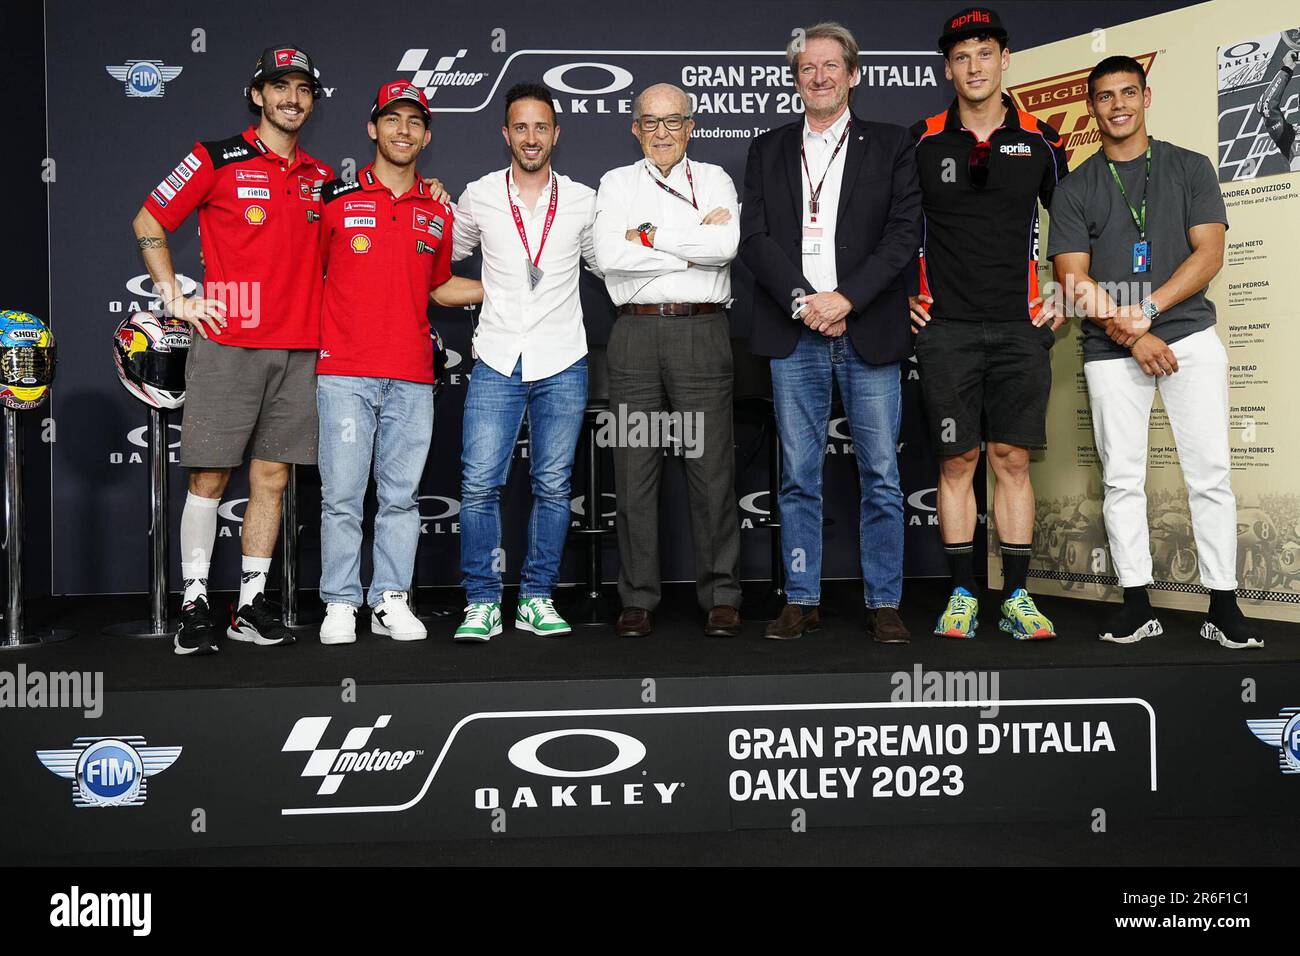 Mugello, Italy. June 8th, 2023. Andrea Dovizioso is now officially a MotoGP™ Legend. The 2004 125ccc World Champion and three-time MotoGP™ runner up was inducted into the Hall of Fame at the Gran Premio d'Italia Oakley. Mugello, Italia, 08 Junio de 2023  POOL/ MotoGP.com/Cordon Press Images will be for editorial use only. Mandatory credit: © MotoGP.com Cordon Press/Alamy Live News Stock Photo